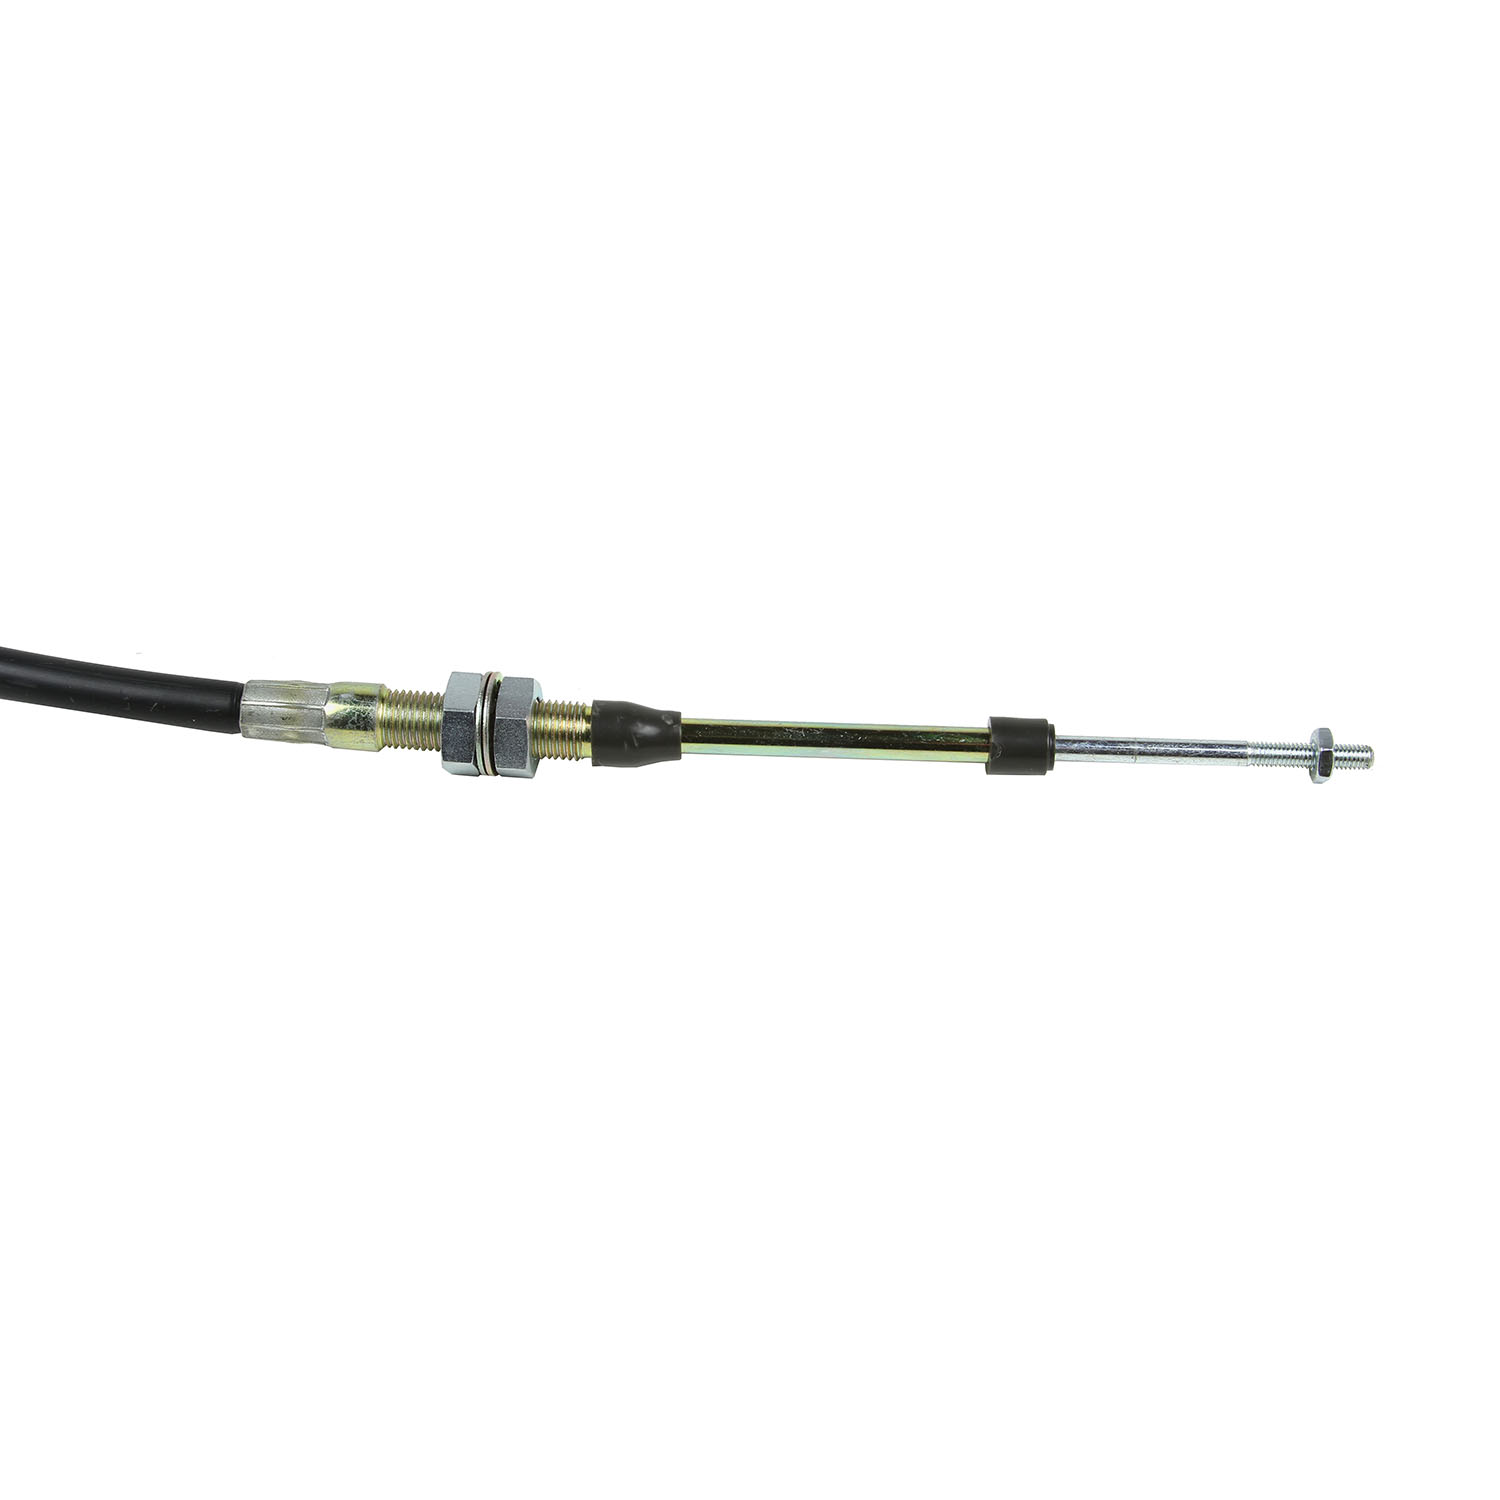 B&M Super Duty Shifter Cable - 3-Foot Length - Black 